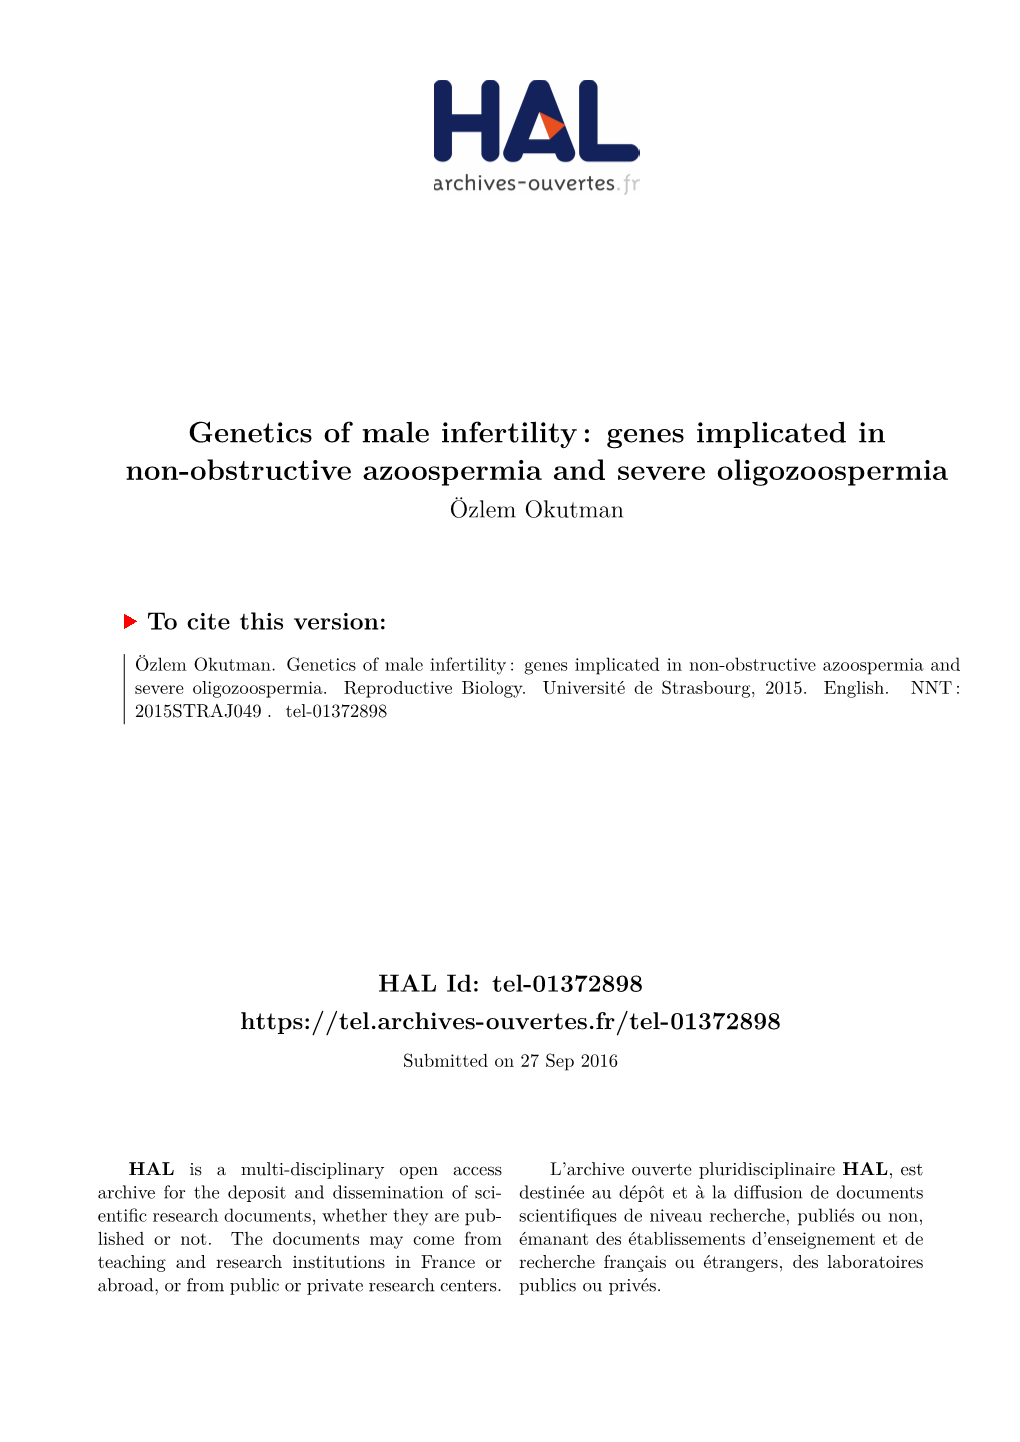 Genetics of Male Infertility: Genes Implicated in Non-Obstructive